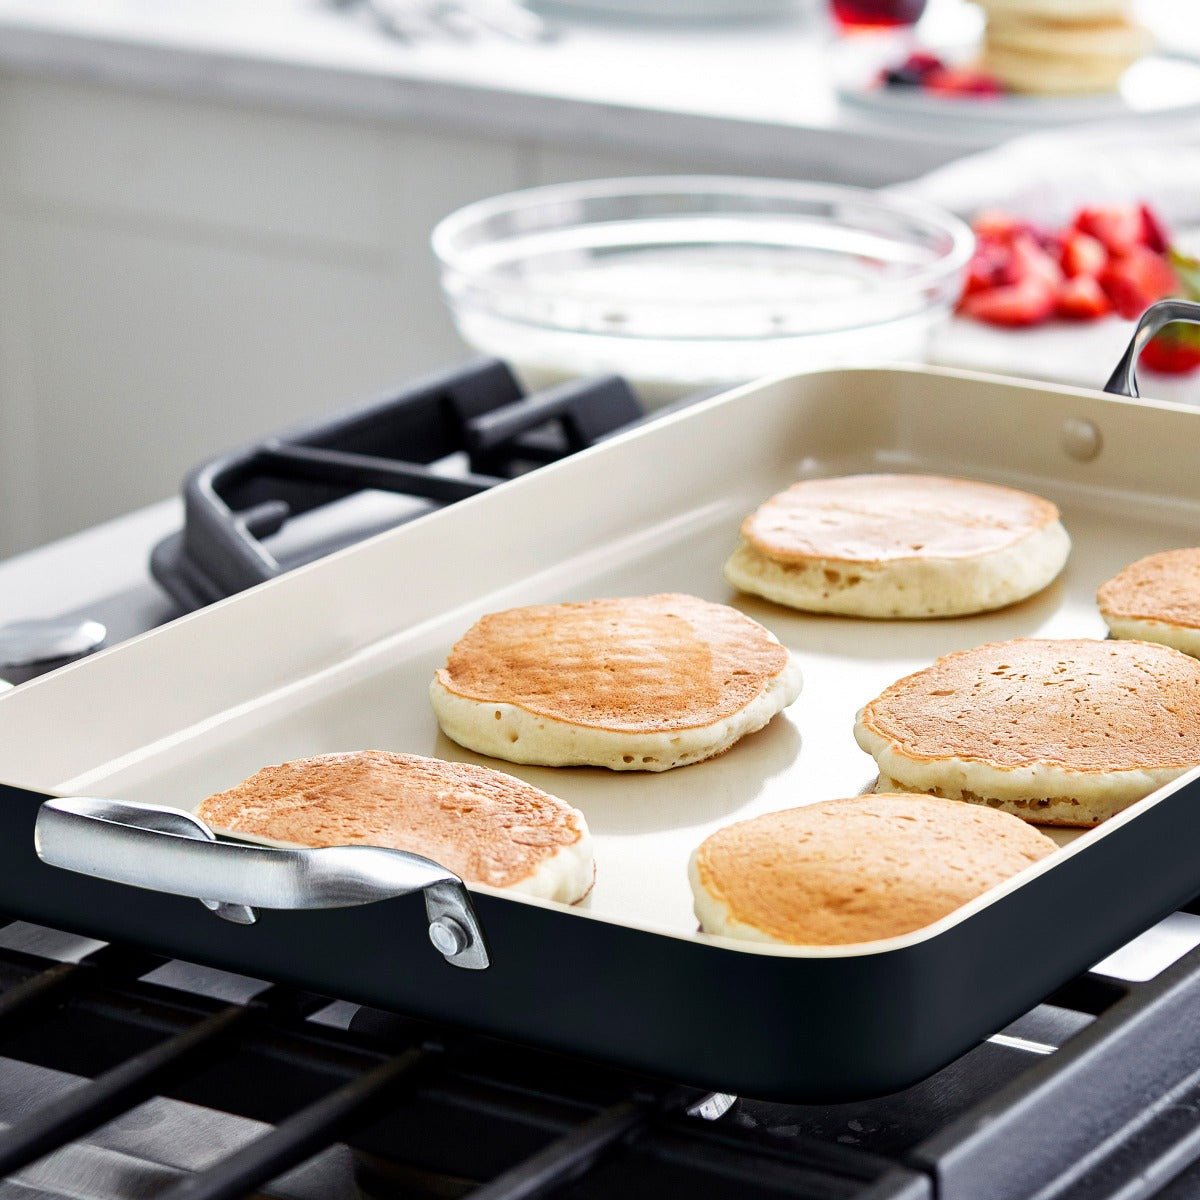 Buying The Best Double Burner Griddle For Glass Top Stove